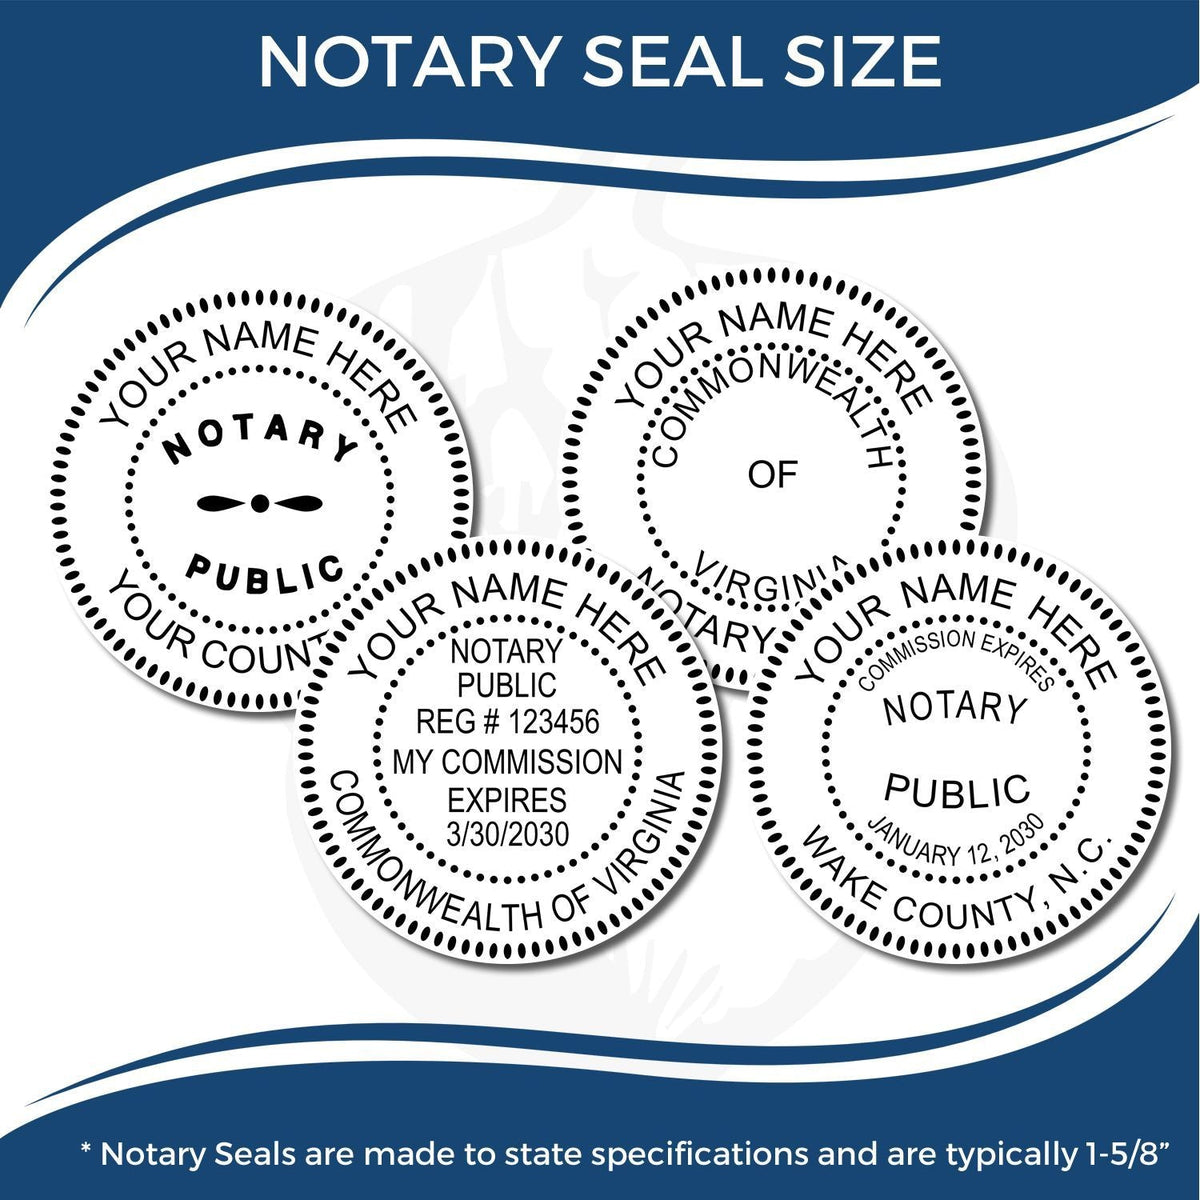 Notary Seal Size Typically 1-5/8 in Size